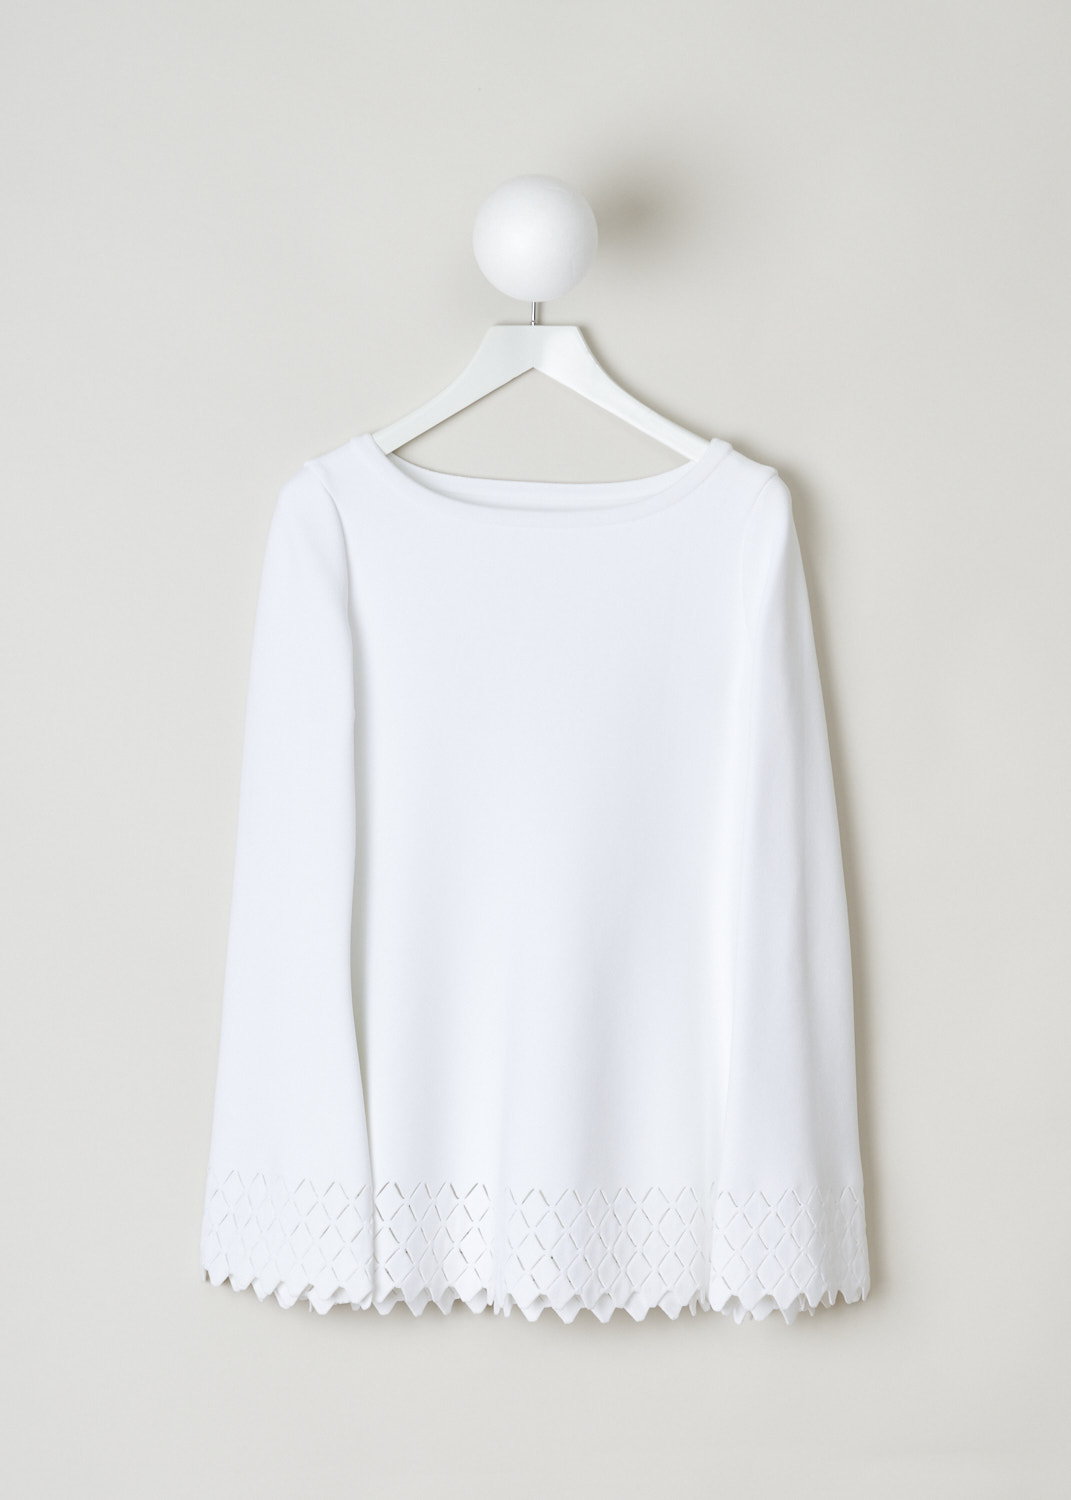 AlaÃ¯a, White A-line top with diamond detailing, 8S9UE80LM381_C000, White, Back, White A-line top with a boat neckline. The heavy duty fabric feels sturdy but also stretchy. The cuffs of the long sleeves are adorned with a diamond see-through laser cut hemline. That same hemline can be found across the bottom of the top.